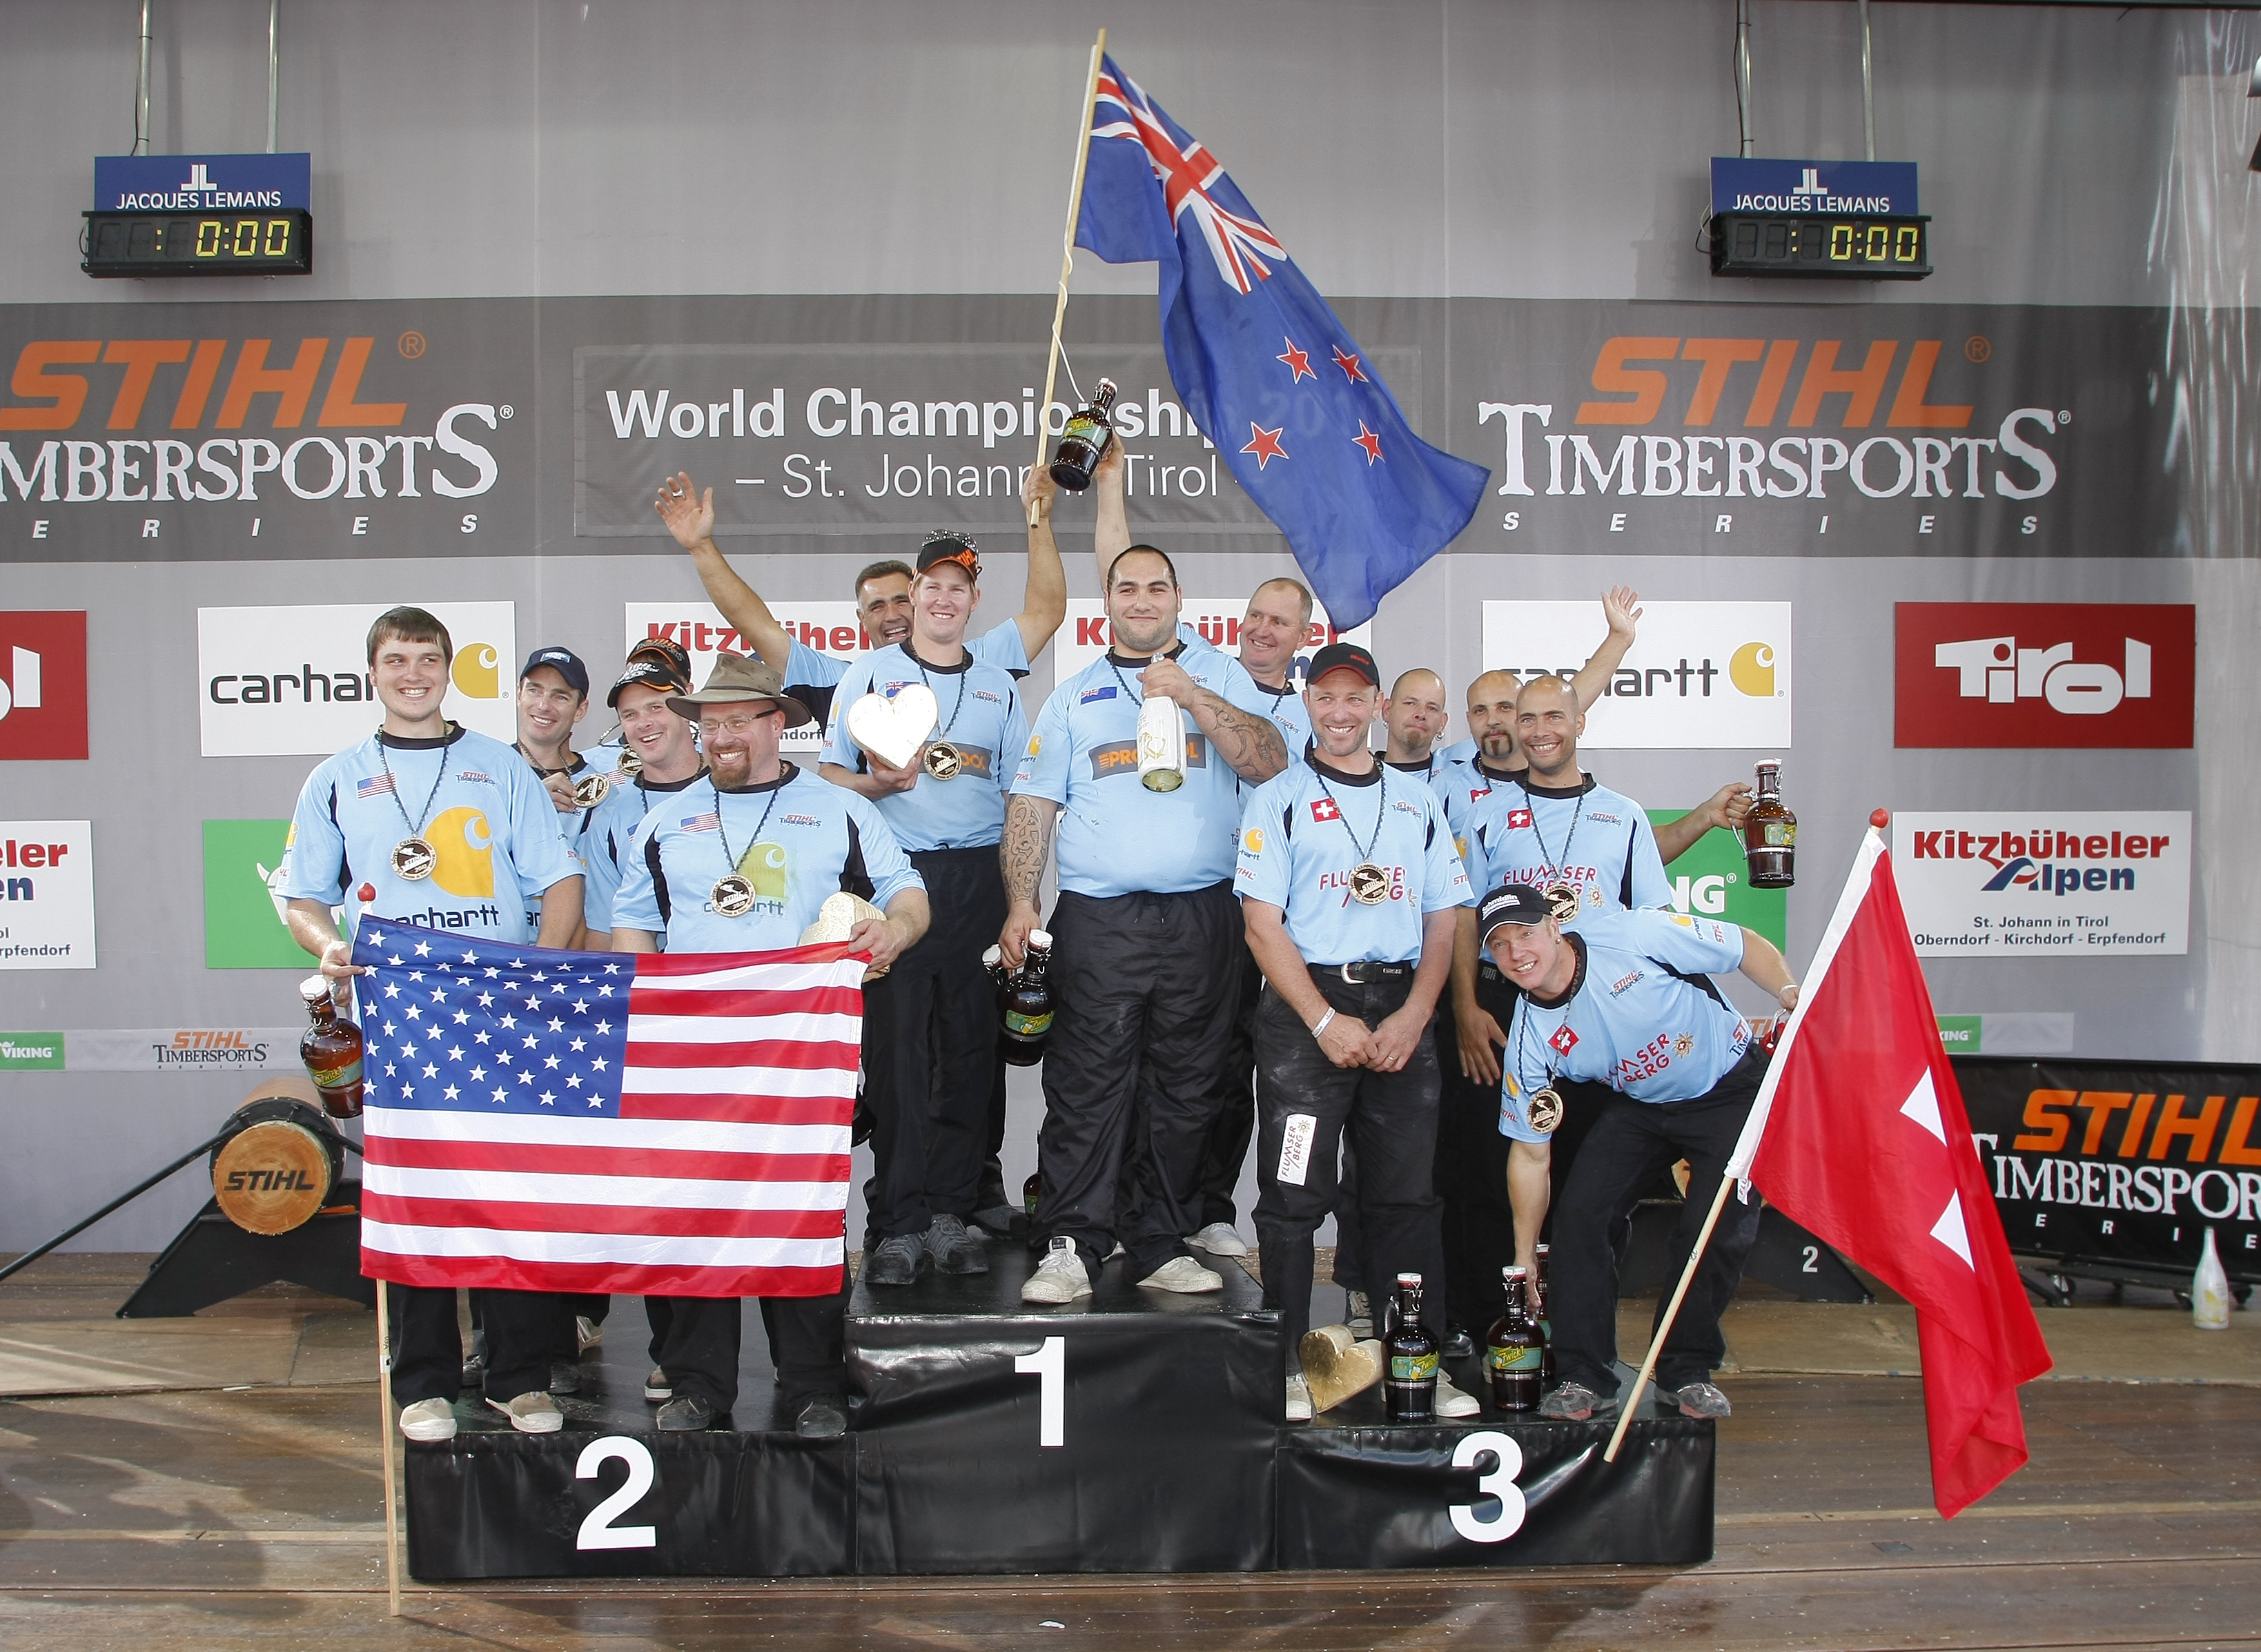 At the premiere of the Team World Championship, Switzerland (r.) secured a place on the podium behind the USA (l.) and New Zealand (m.).